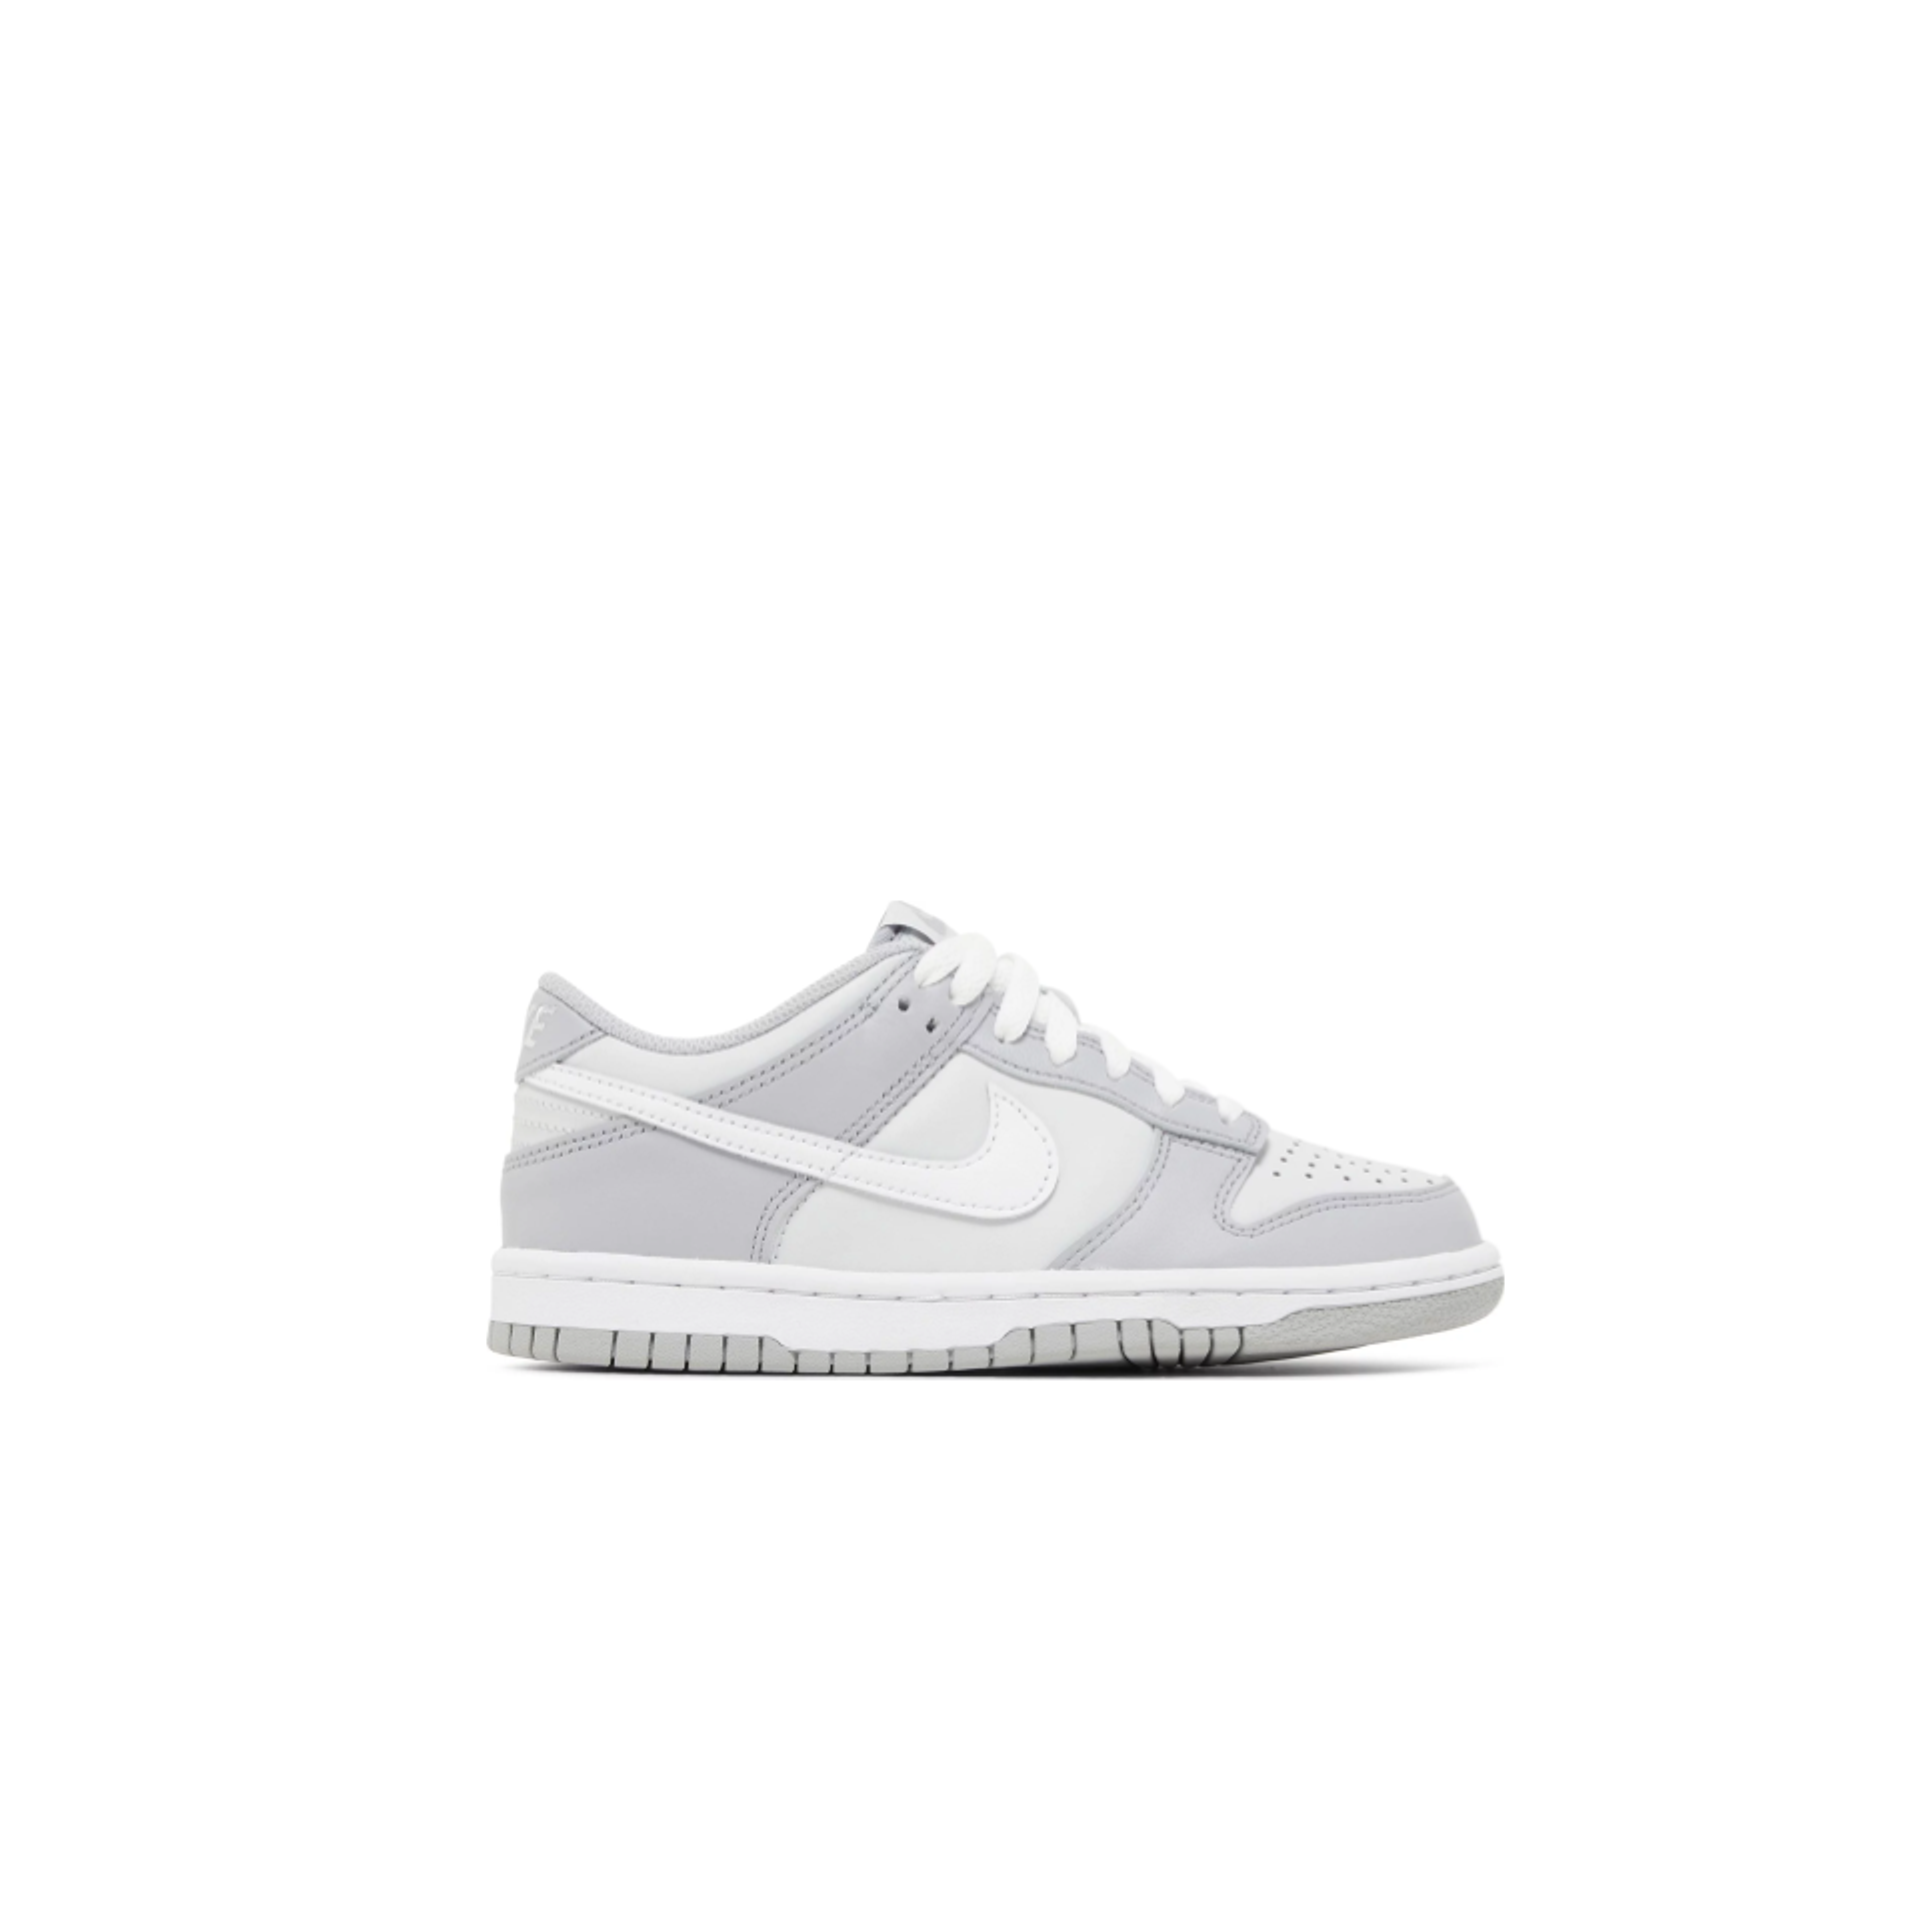 Nike Dunk Low PS 'Wolf Grey' - DH9756 001 | Ox Street